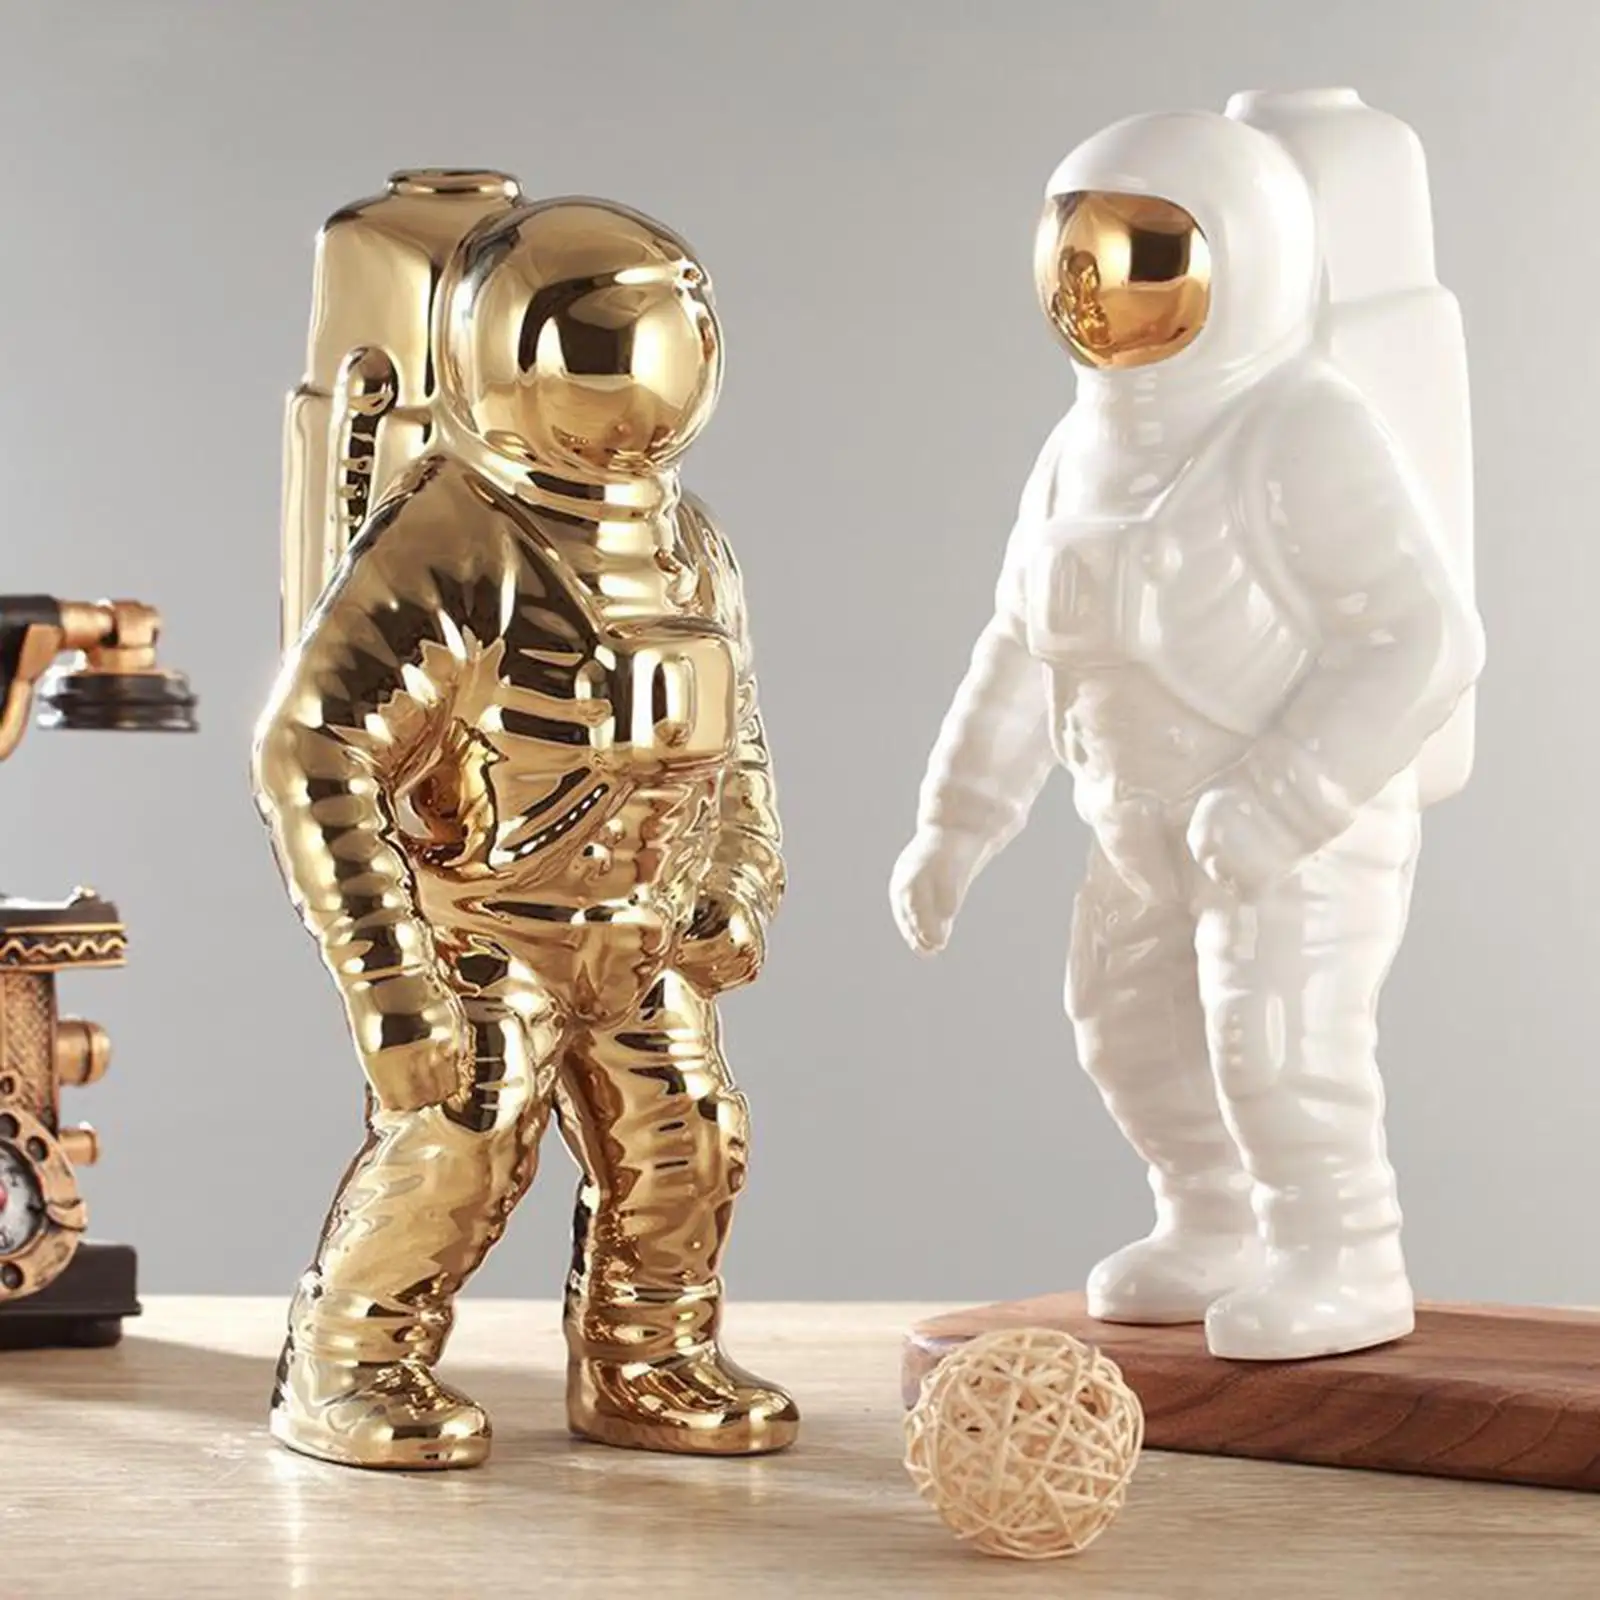 2x Creative Astronaut Model Statue Sculpture Figurine Outer Space Gifts Toy for Children Shelf Bedroom